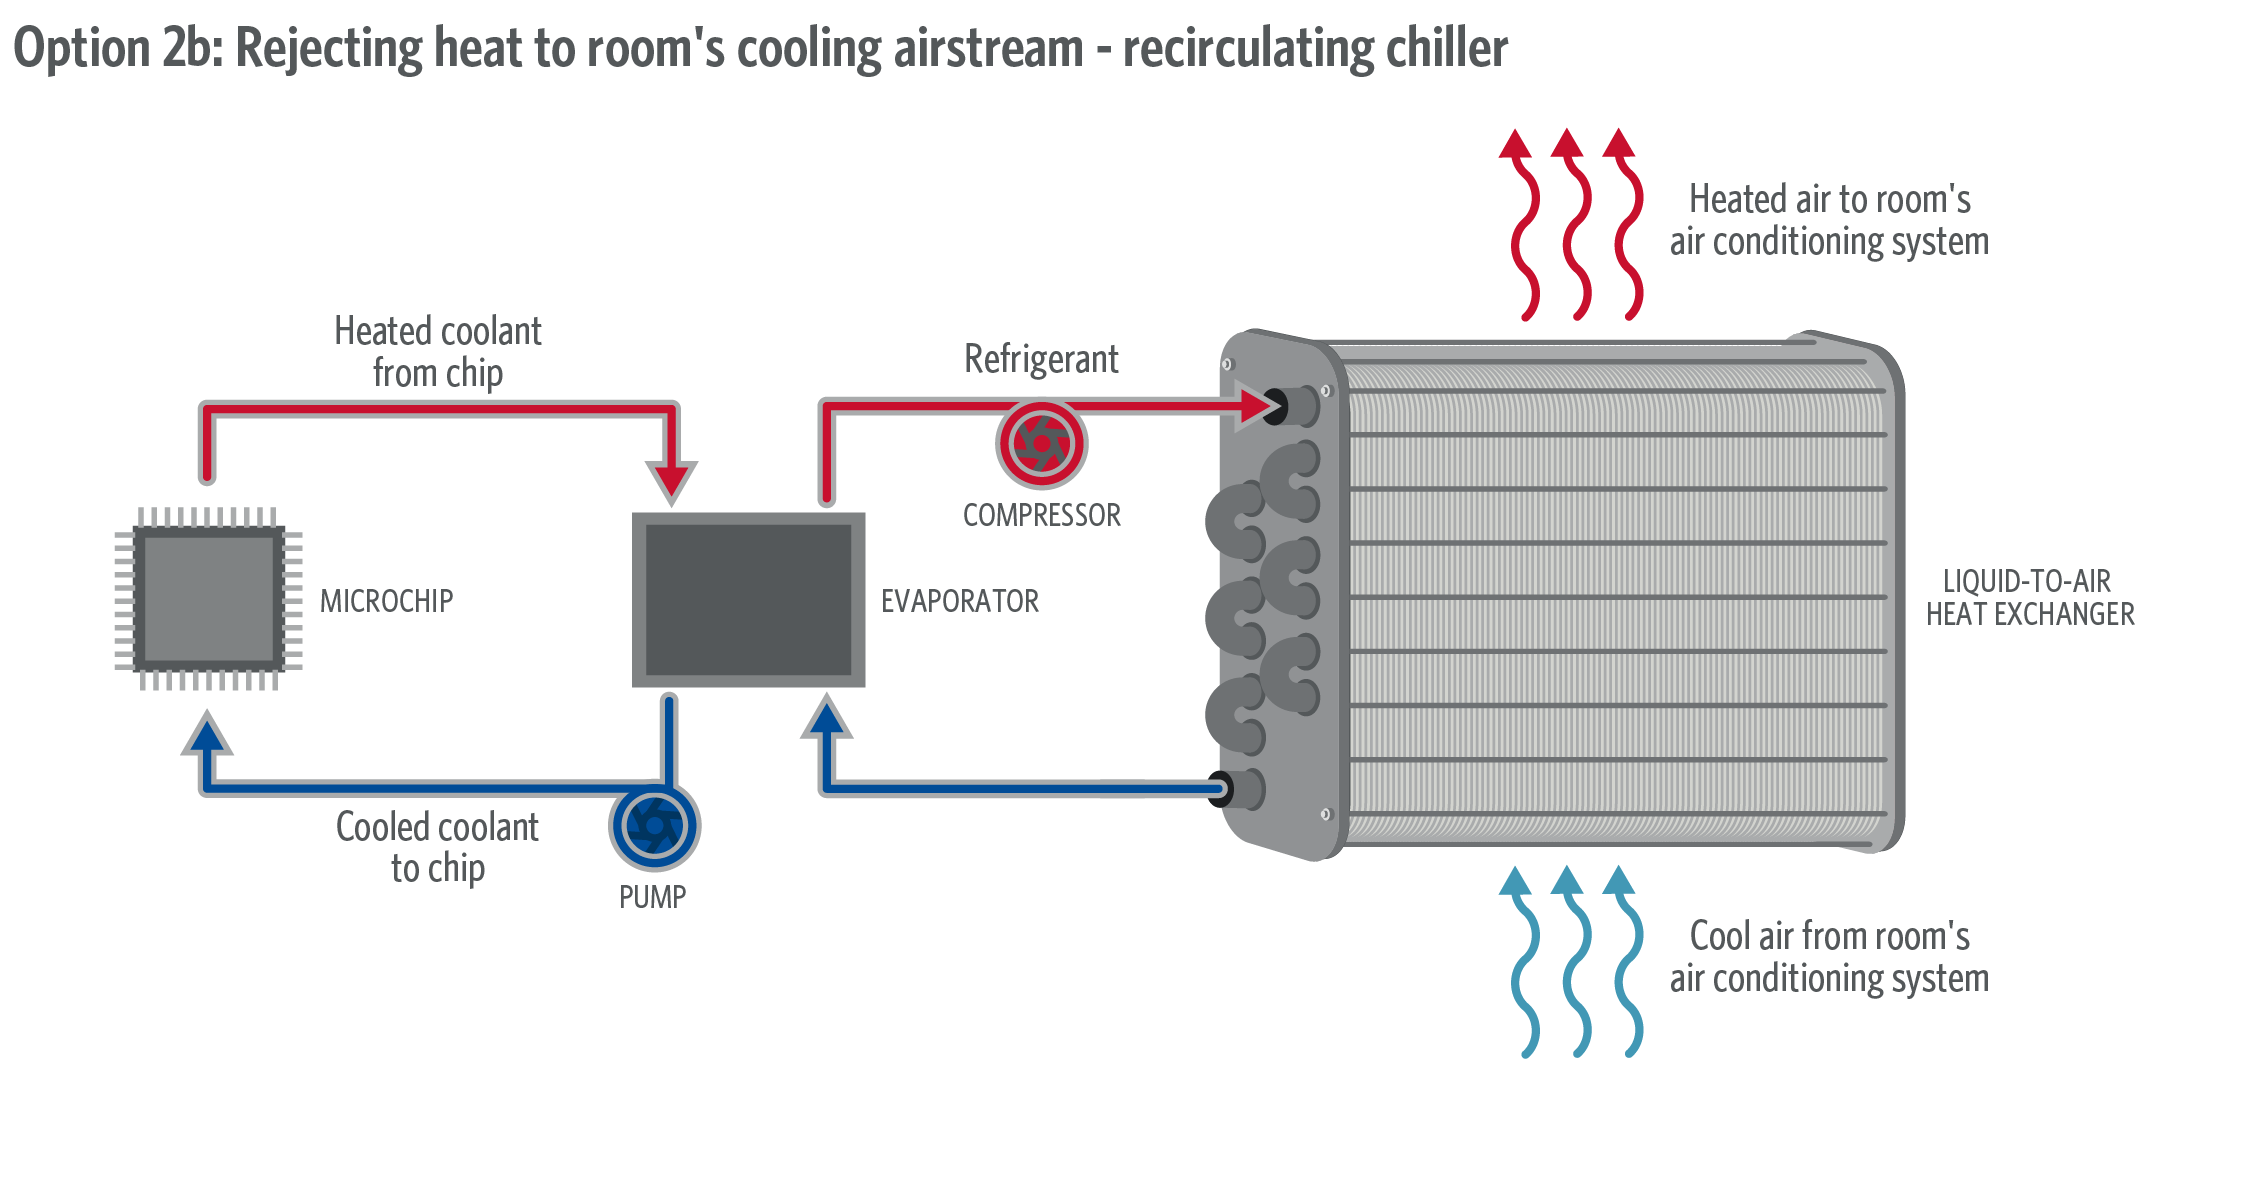 Rejecting heat to room's cooling airstream recirculating chiller.